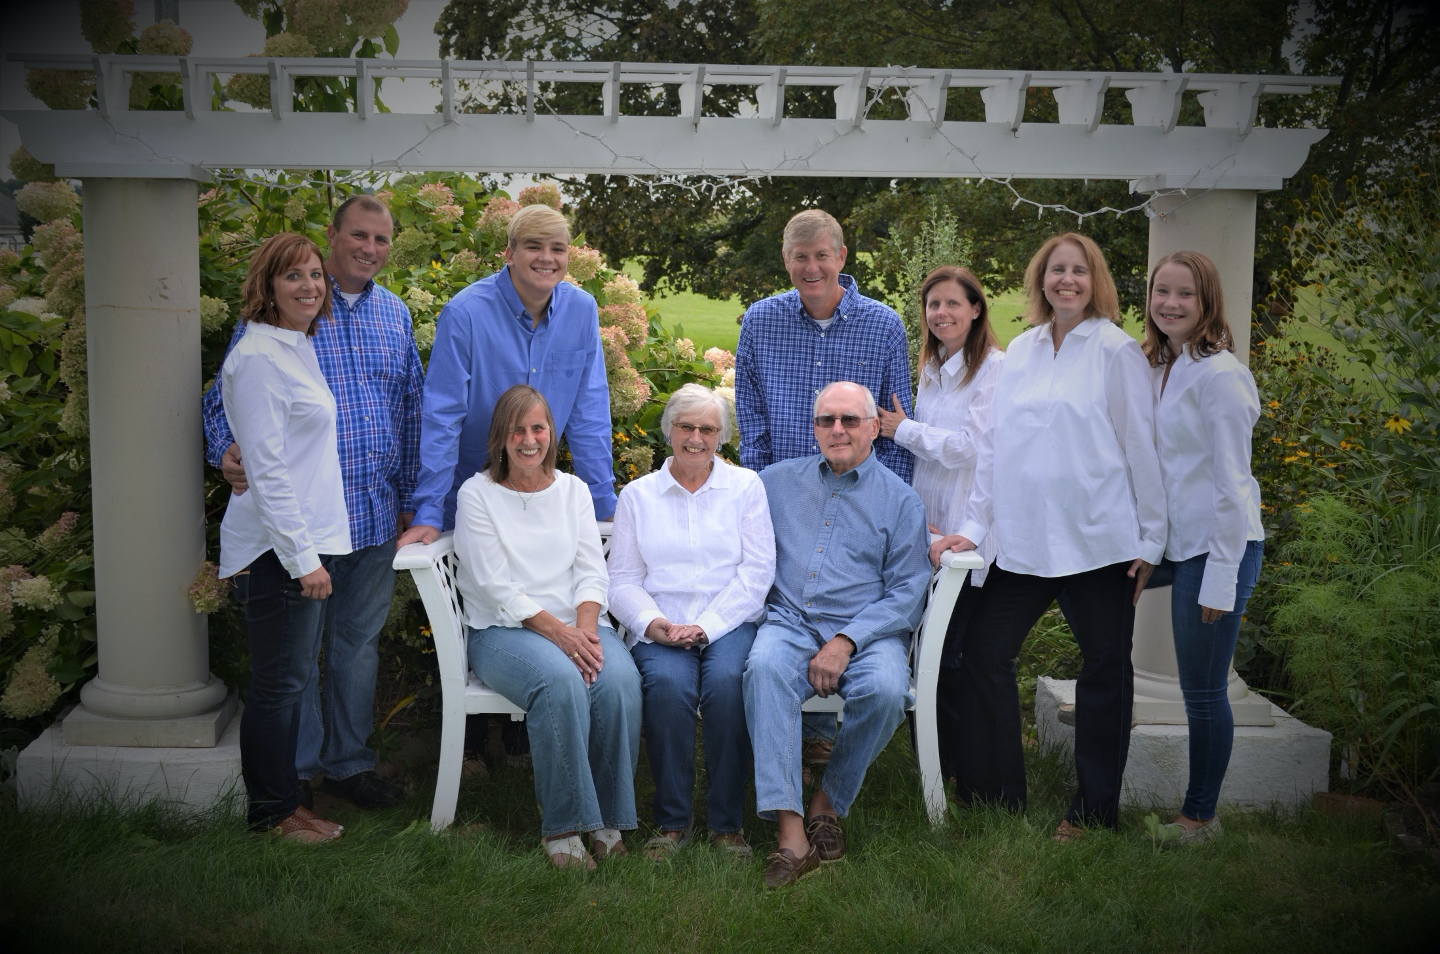 Portrait of family of ten wearing blue and white clothing, outdoors under a pergola.